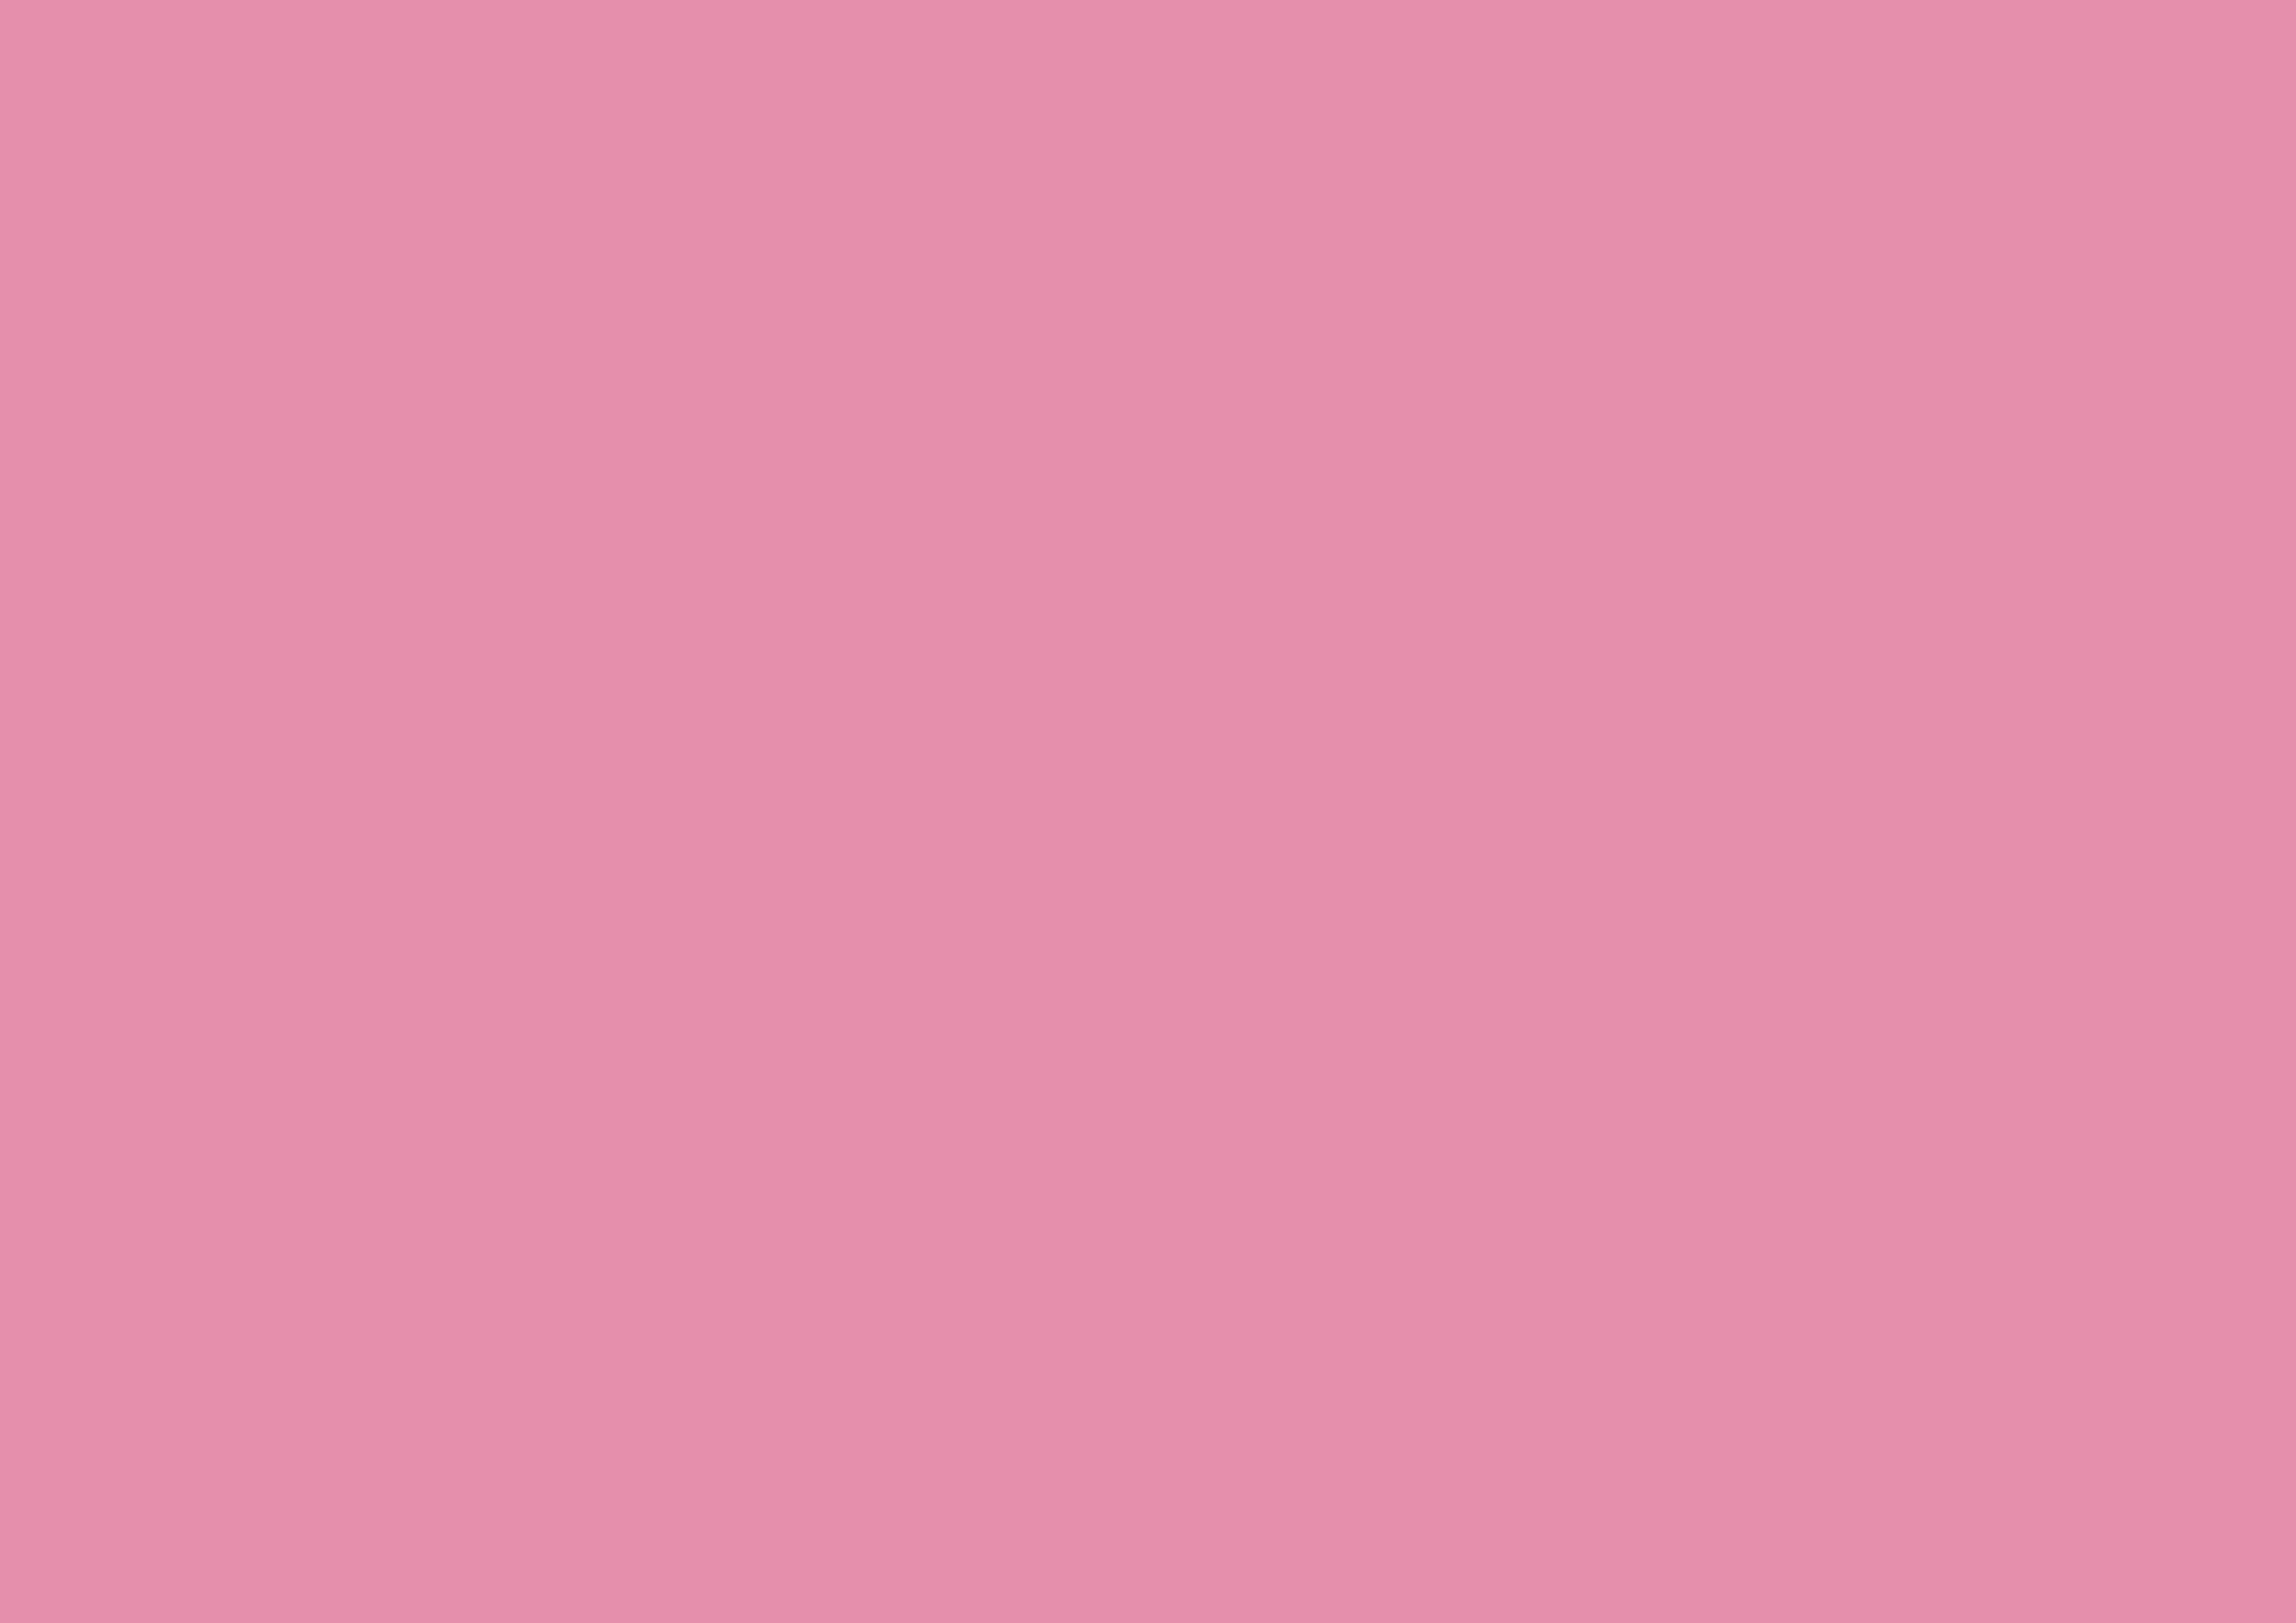 3508x2480 Light Thulian Pink Solid Color Background